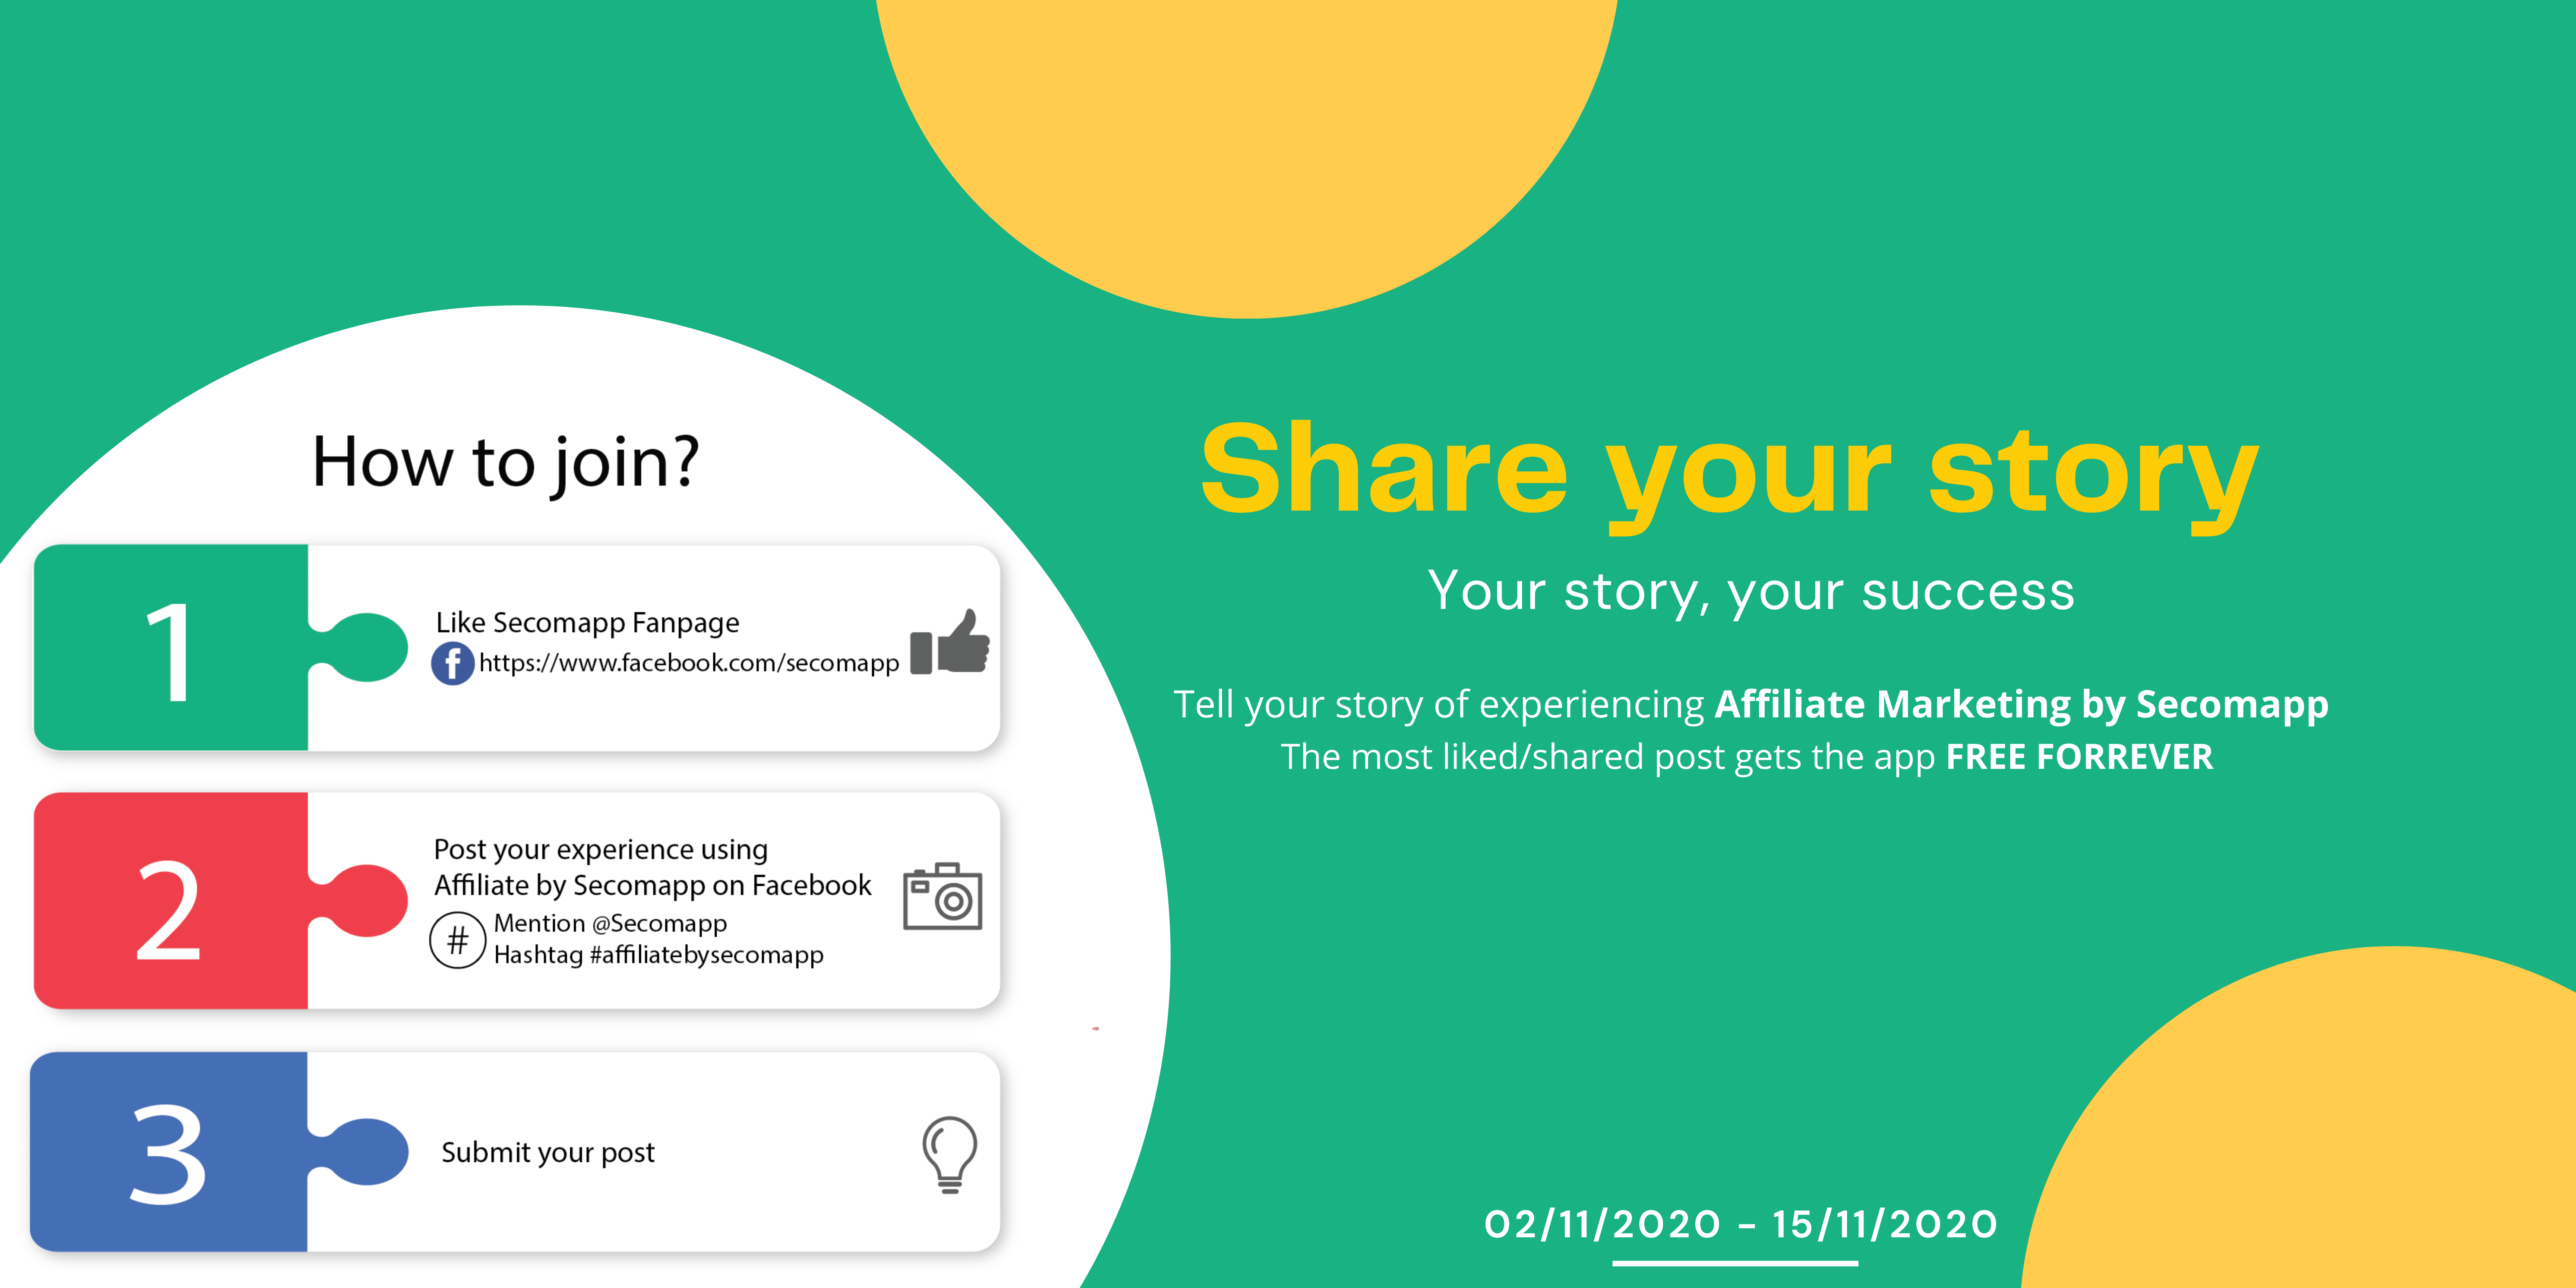 Share your story contest